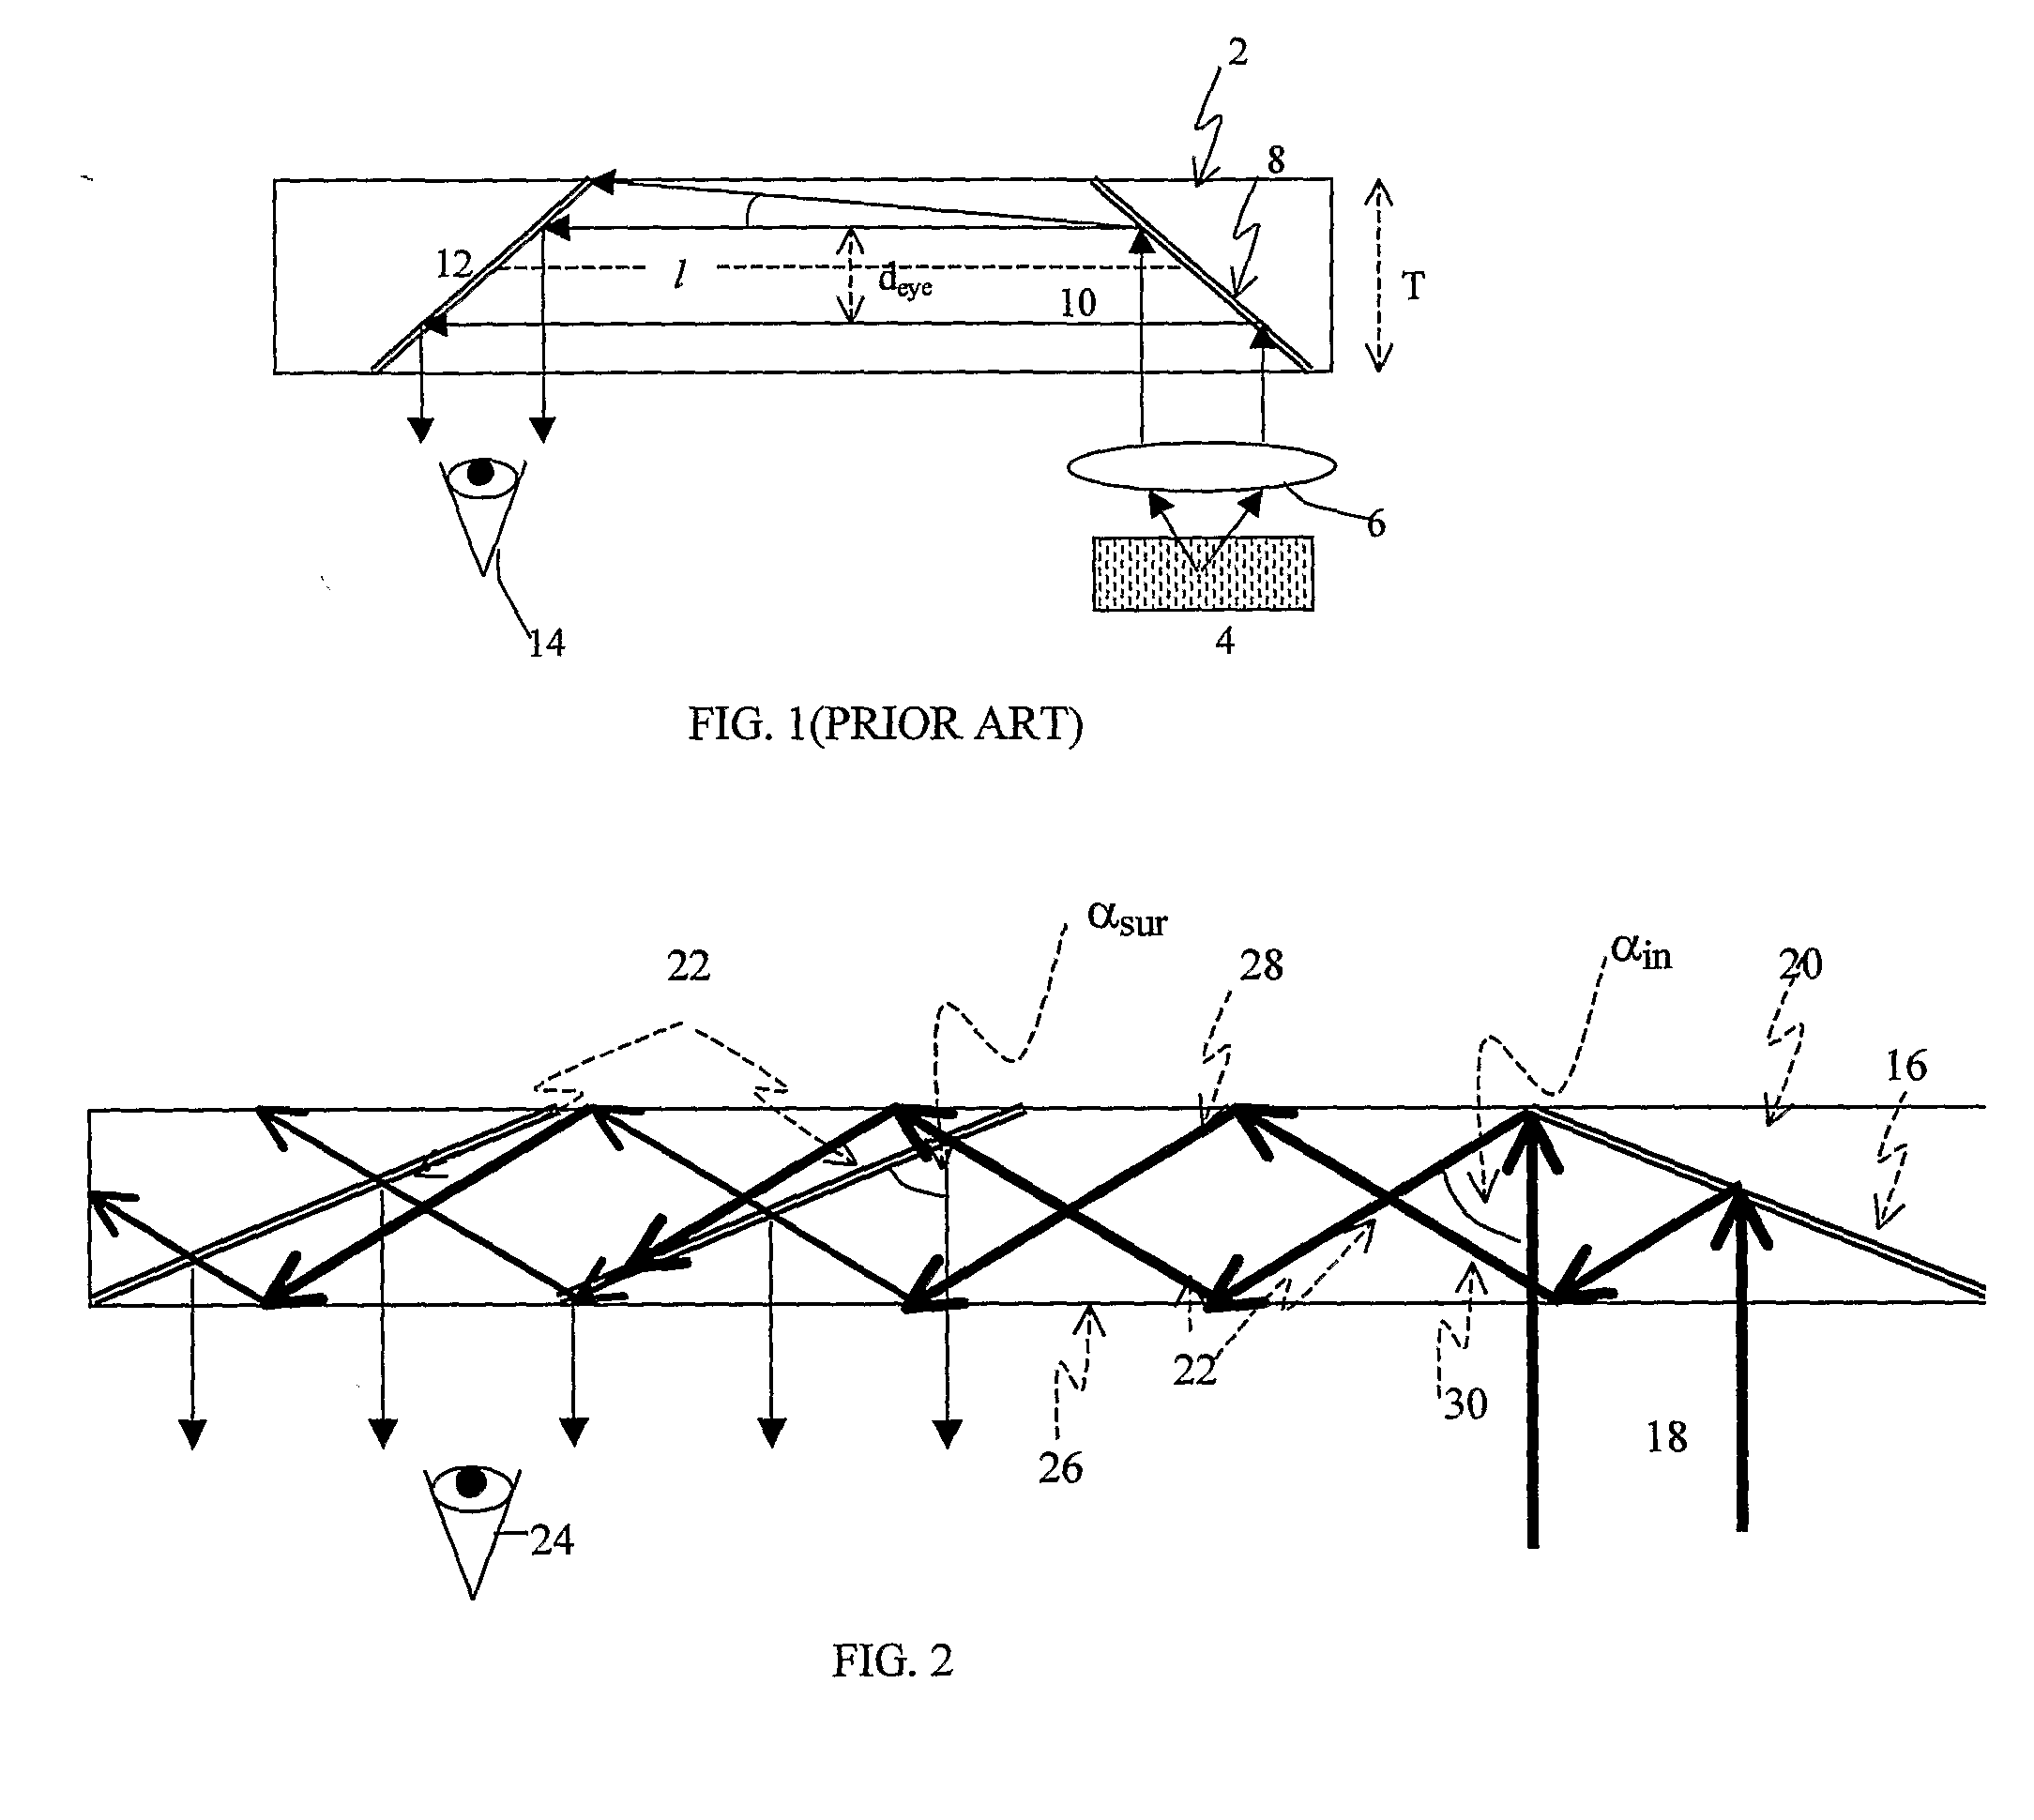 Substrate-Guide Optical Device Utilizing Polarization Beam Splitters